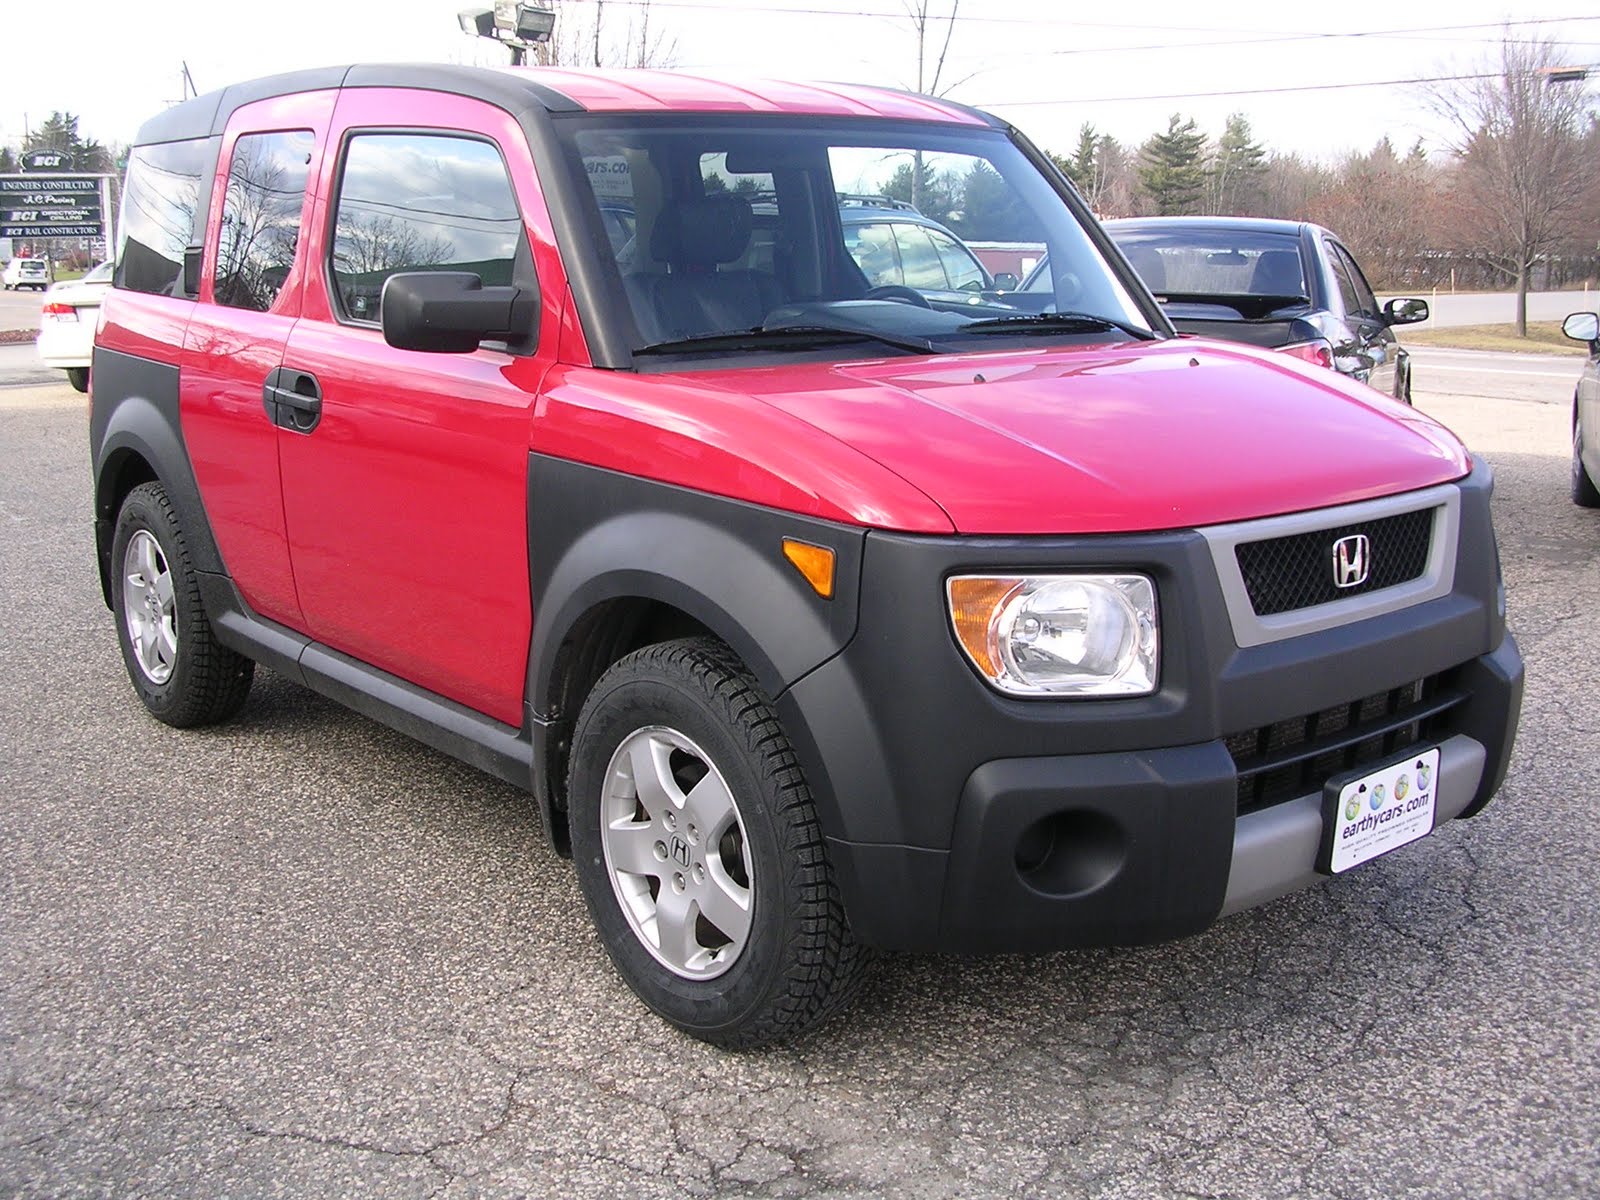 Airbags in a honda element #2